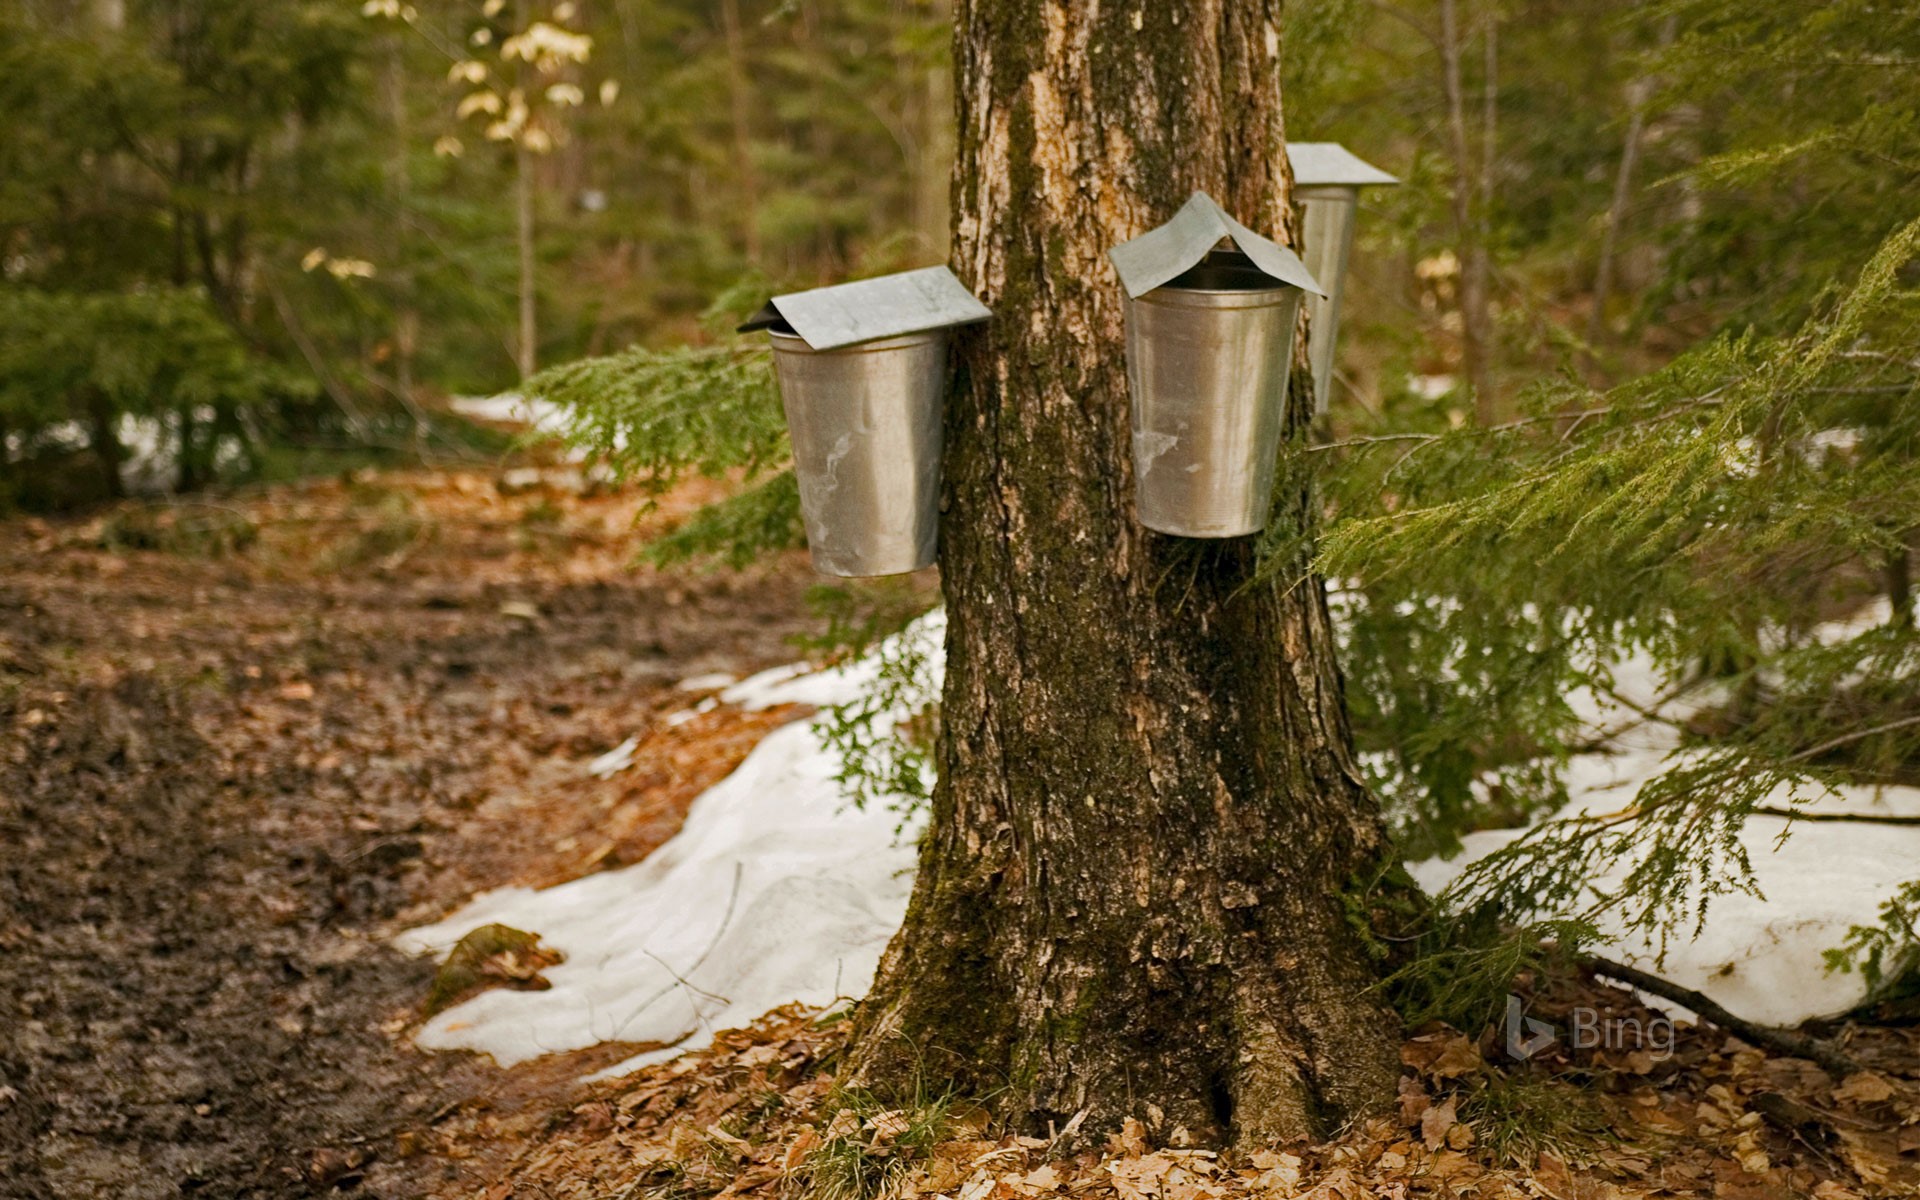 Sap-collecting buckets in Brome-Missisquoi, Quebec, Canada